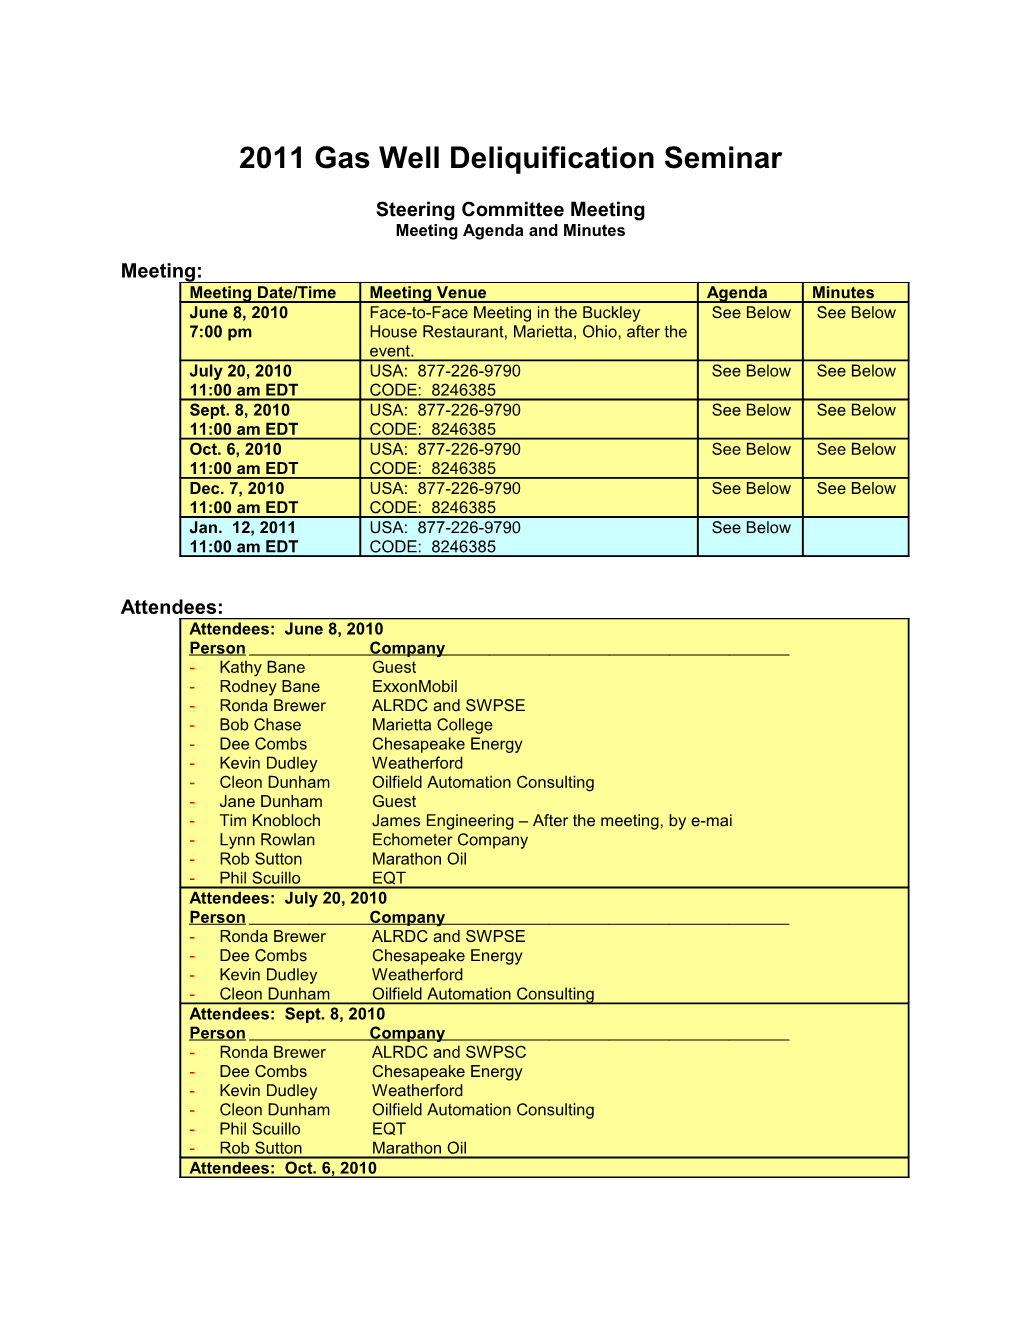 Appalachian Basin Gas Well Deliquification Seminar Oct. 6, 2010Page 1